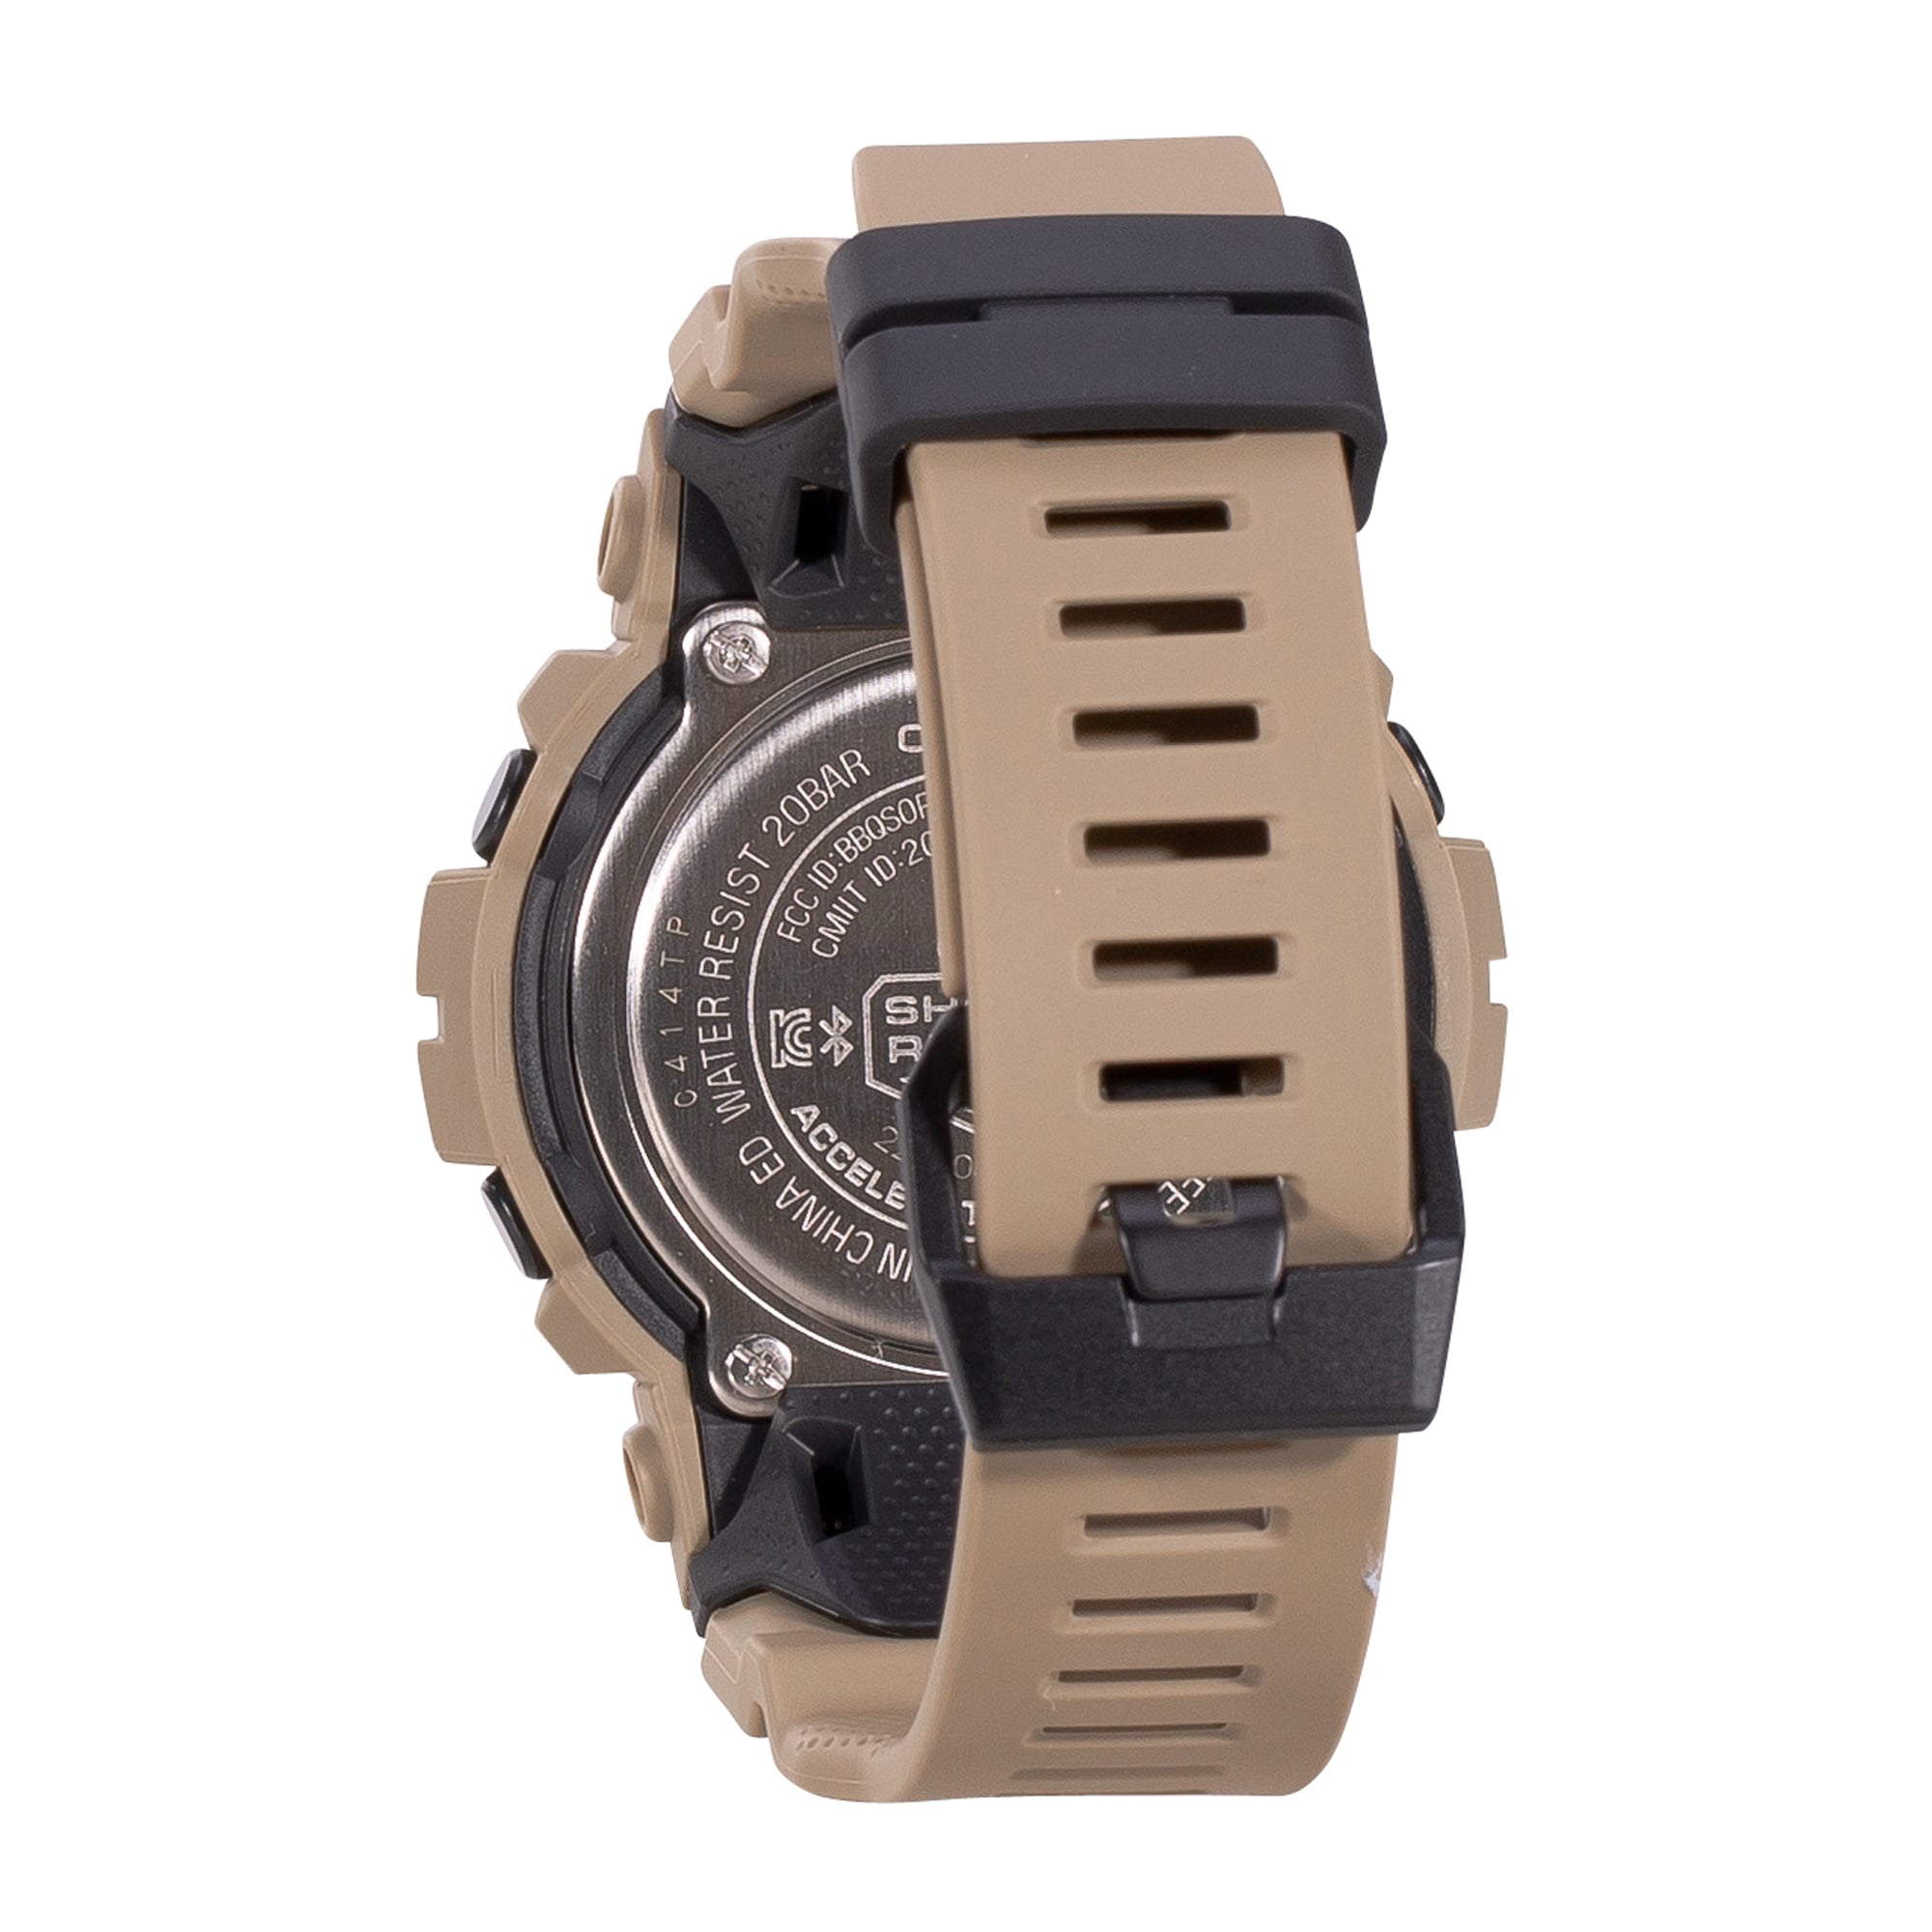 Watch Casio G-Shock th Purchase G-Squad by coyote GBD-800UC-5ER